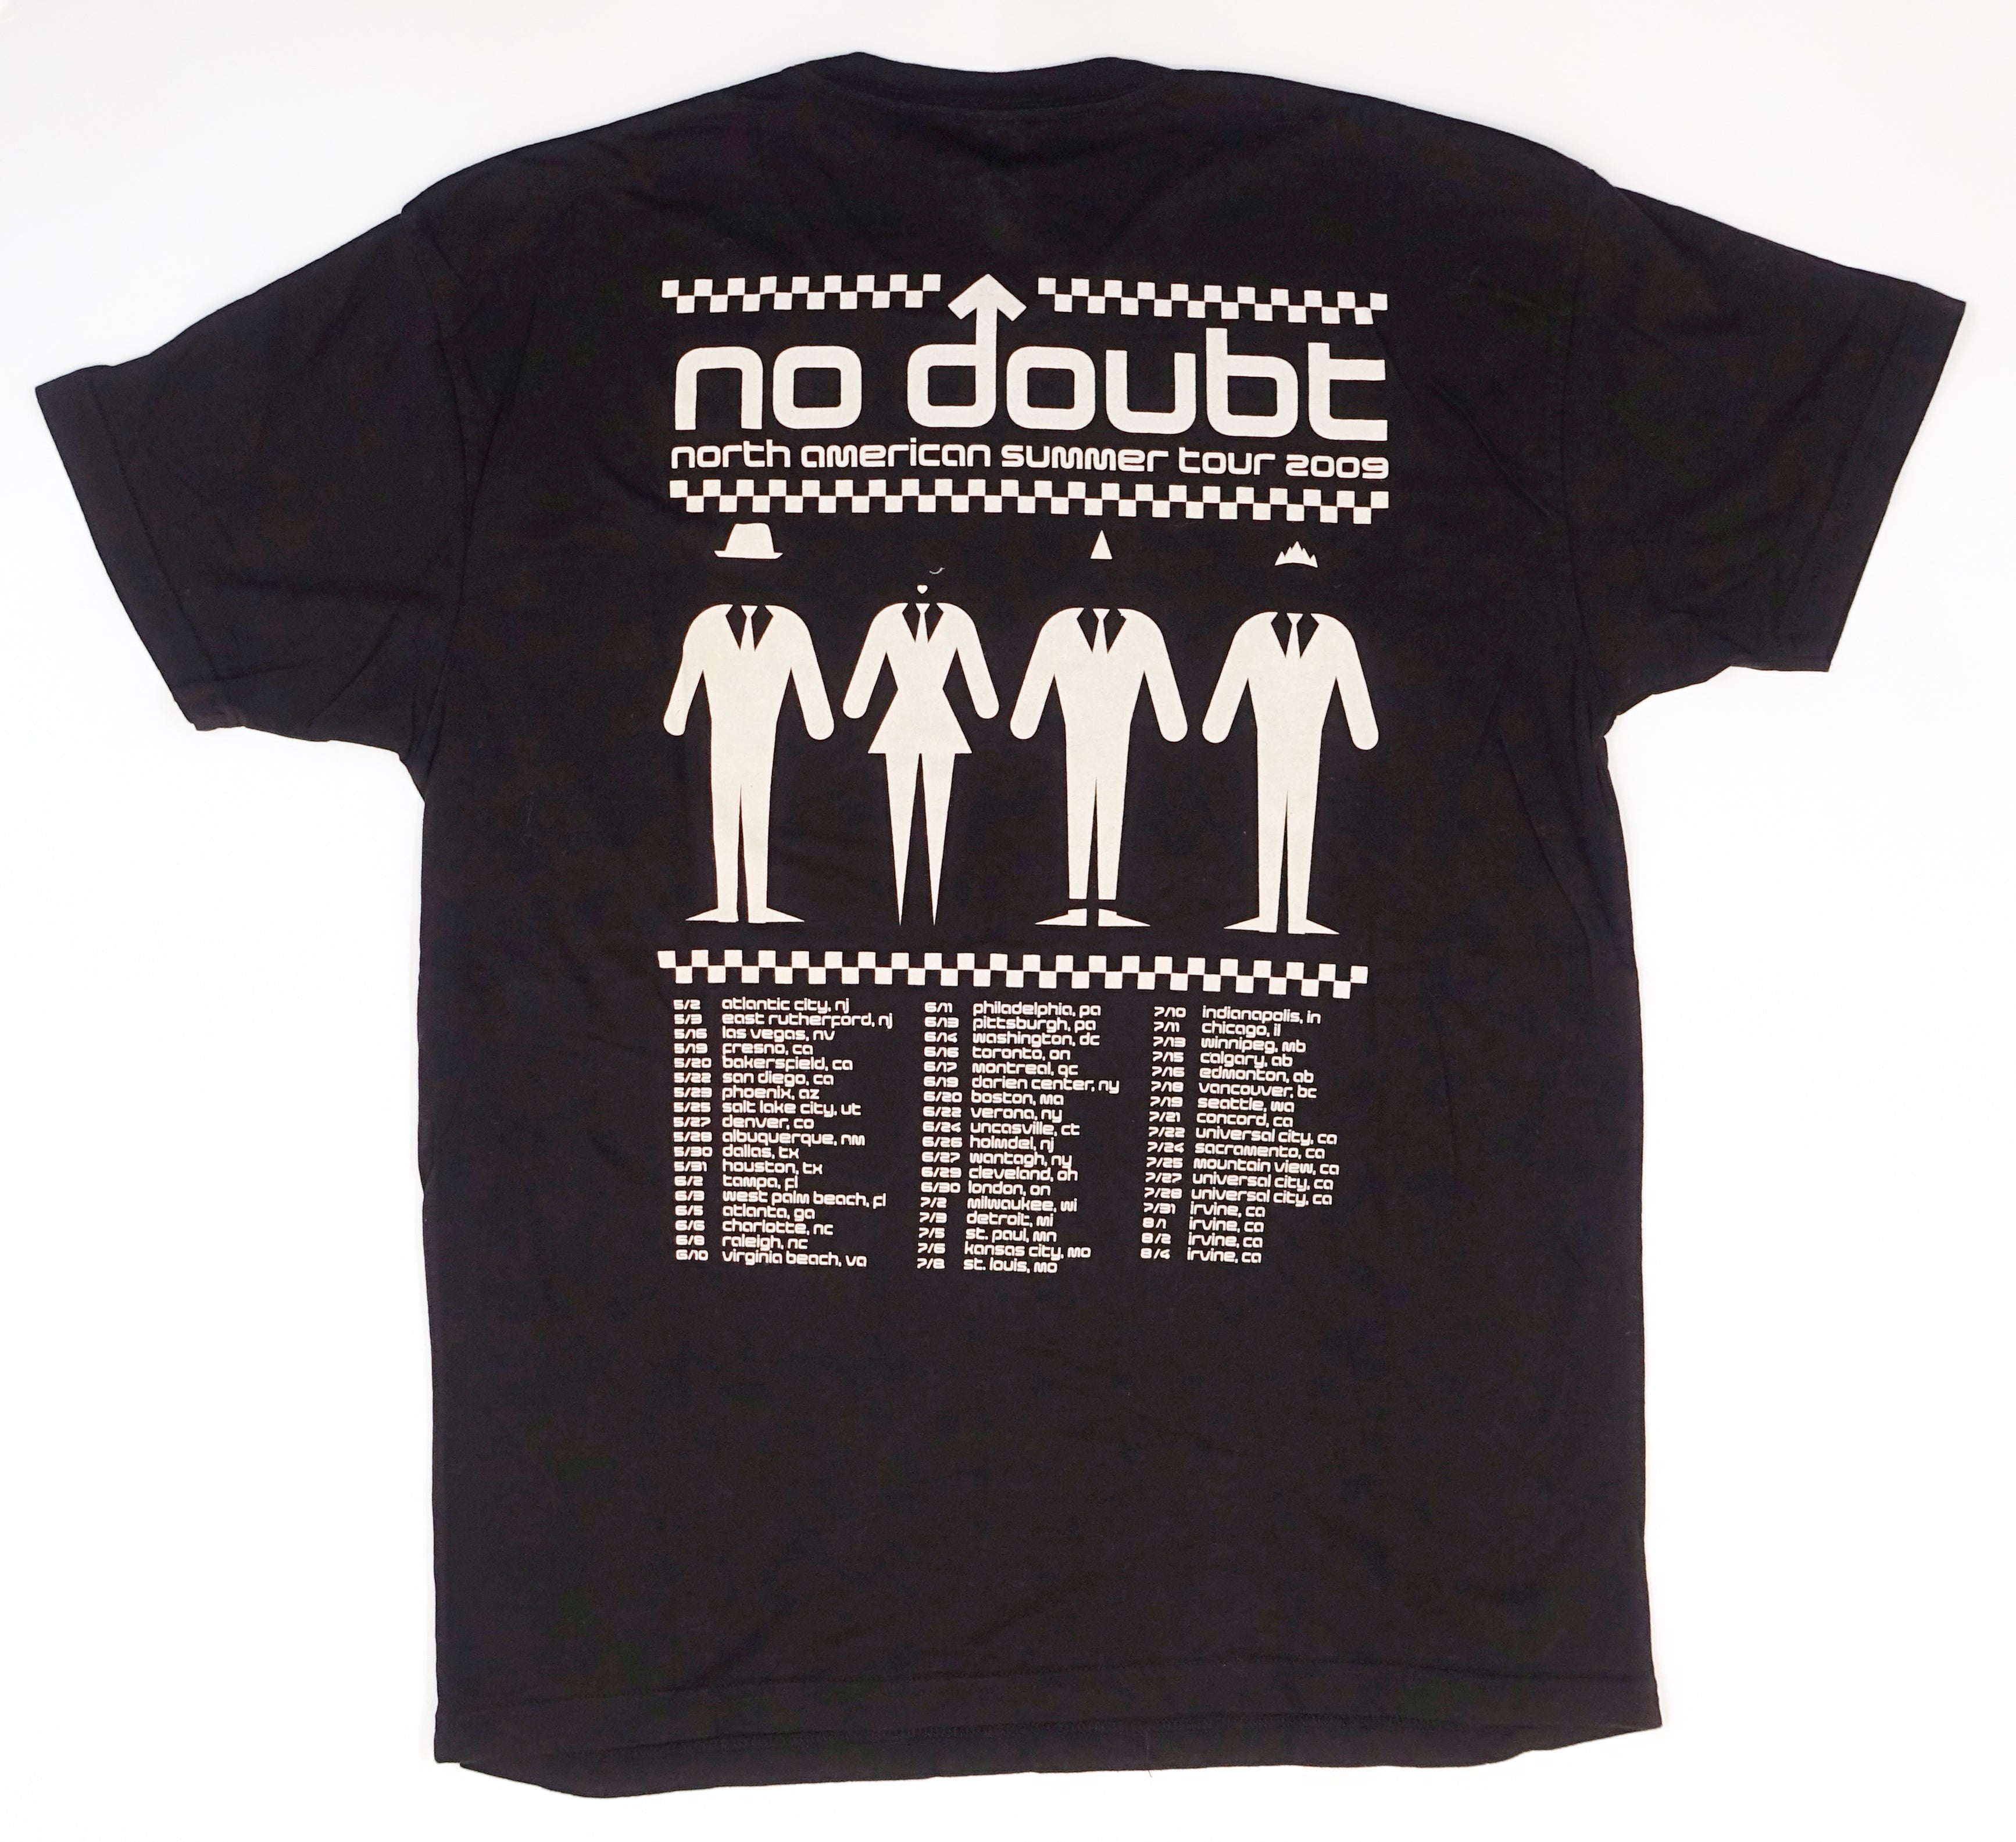 No Doubt - North American Summer 2009 Tour Shirt Size Large